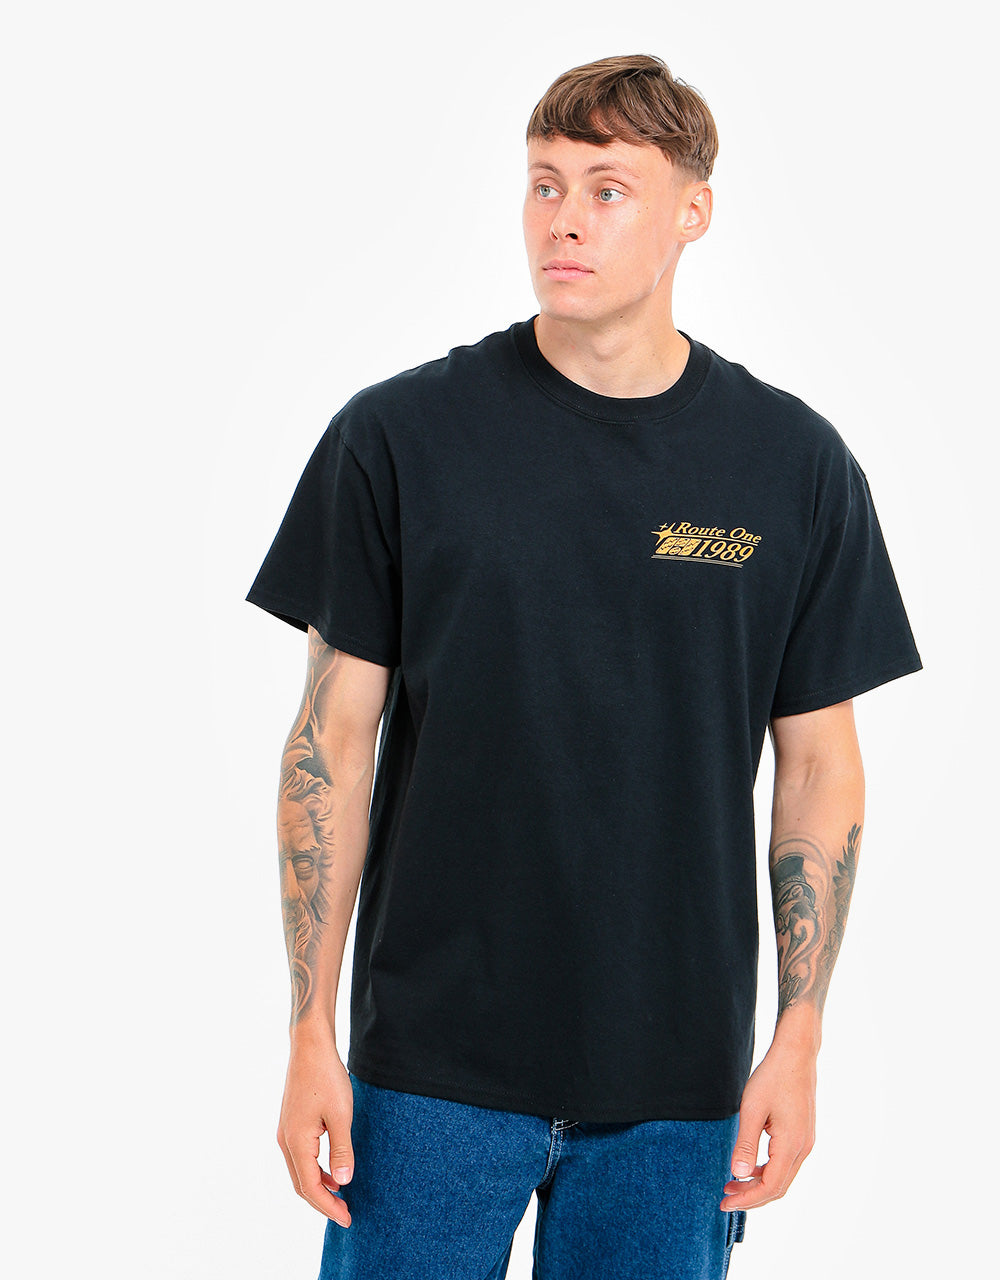 Route One Entertainment System T-Shirt - Black